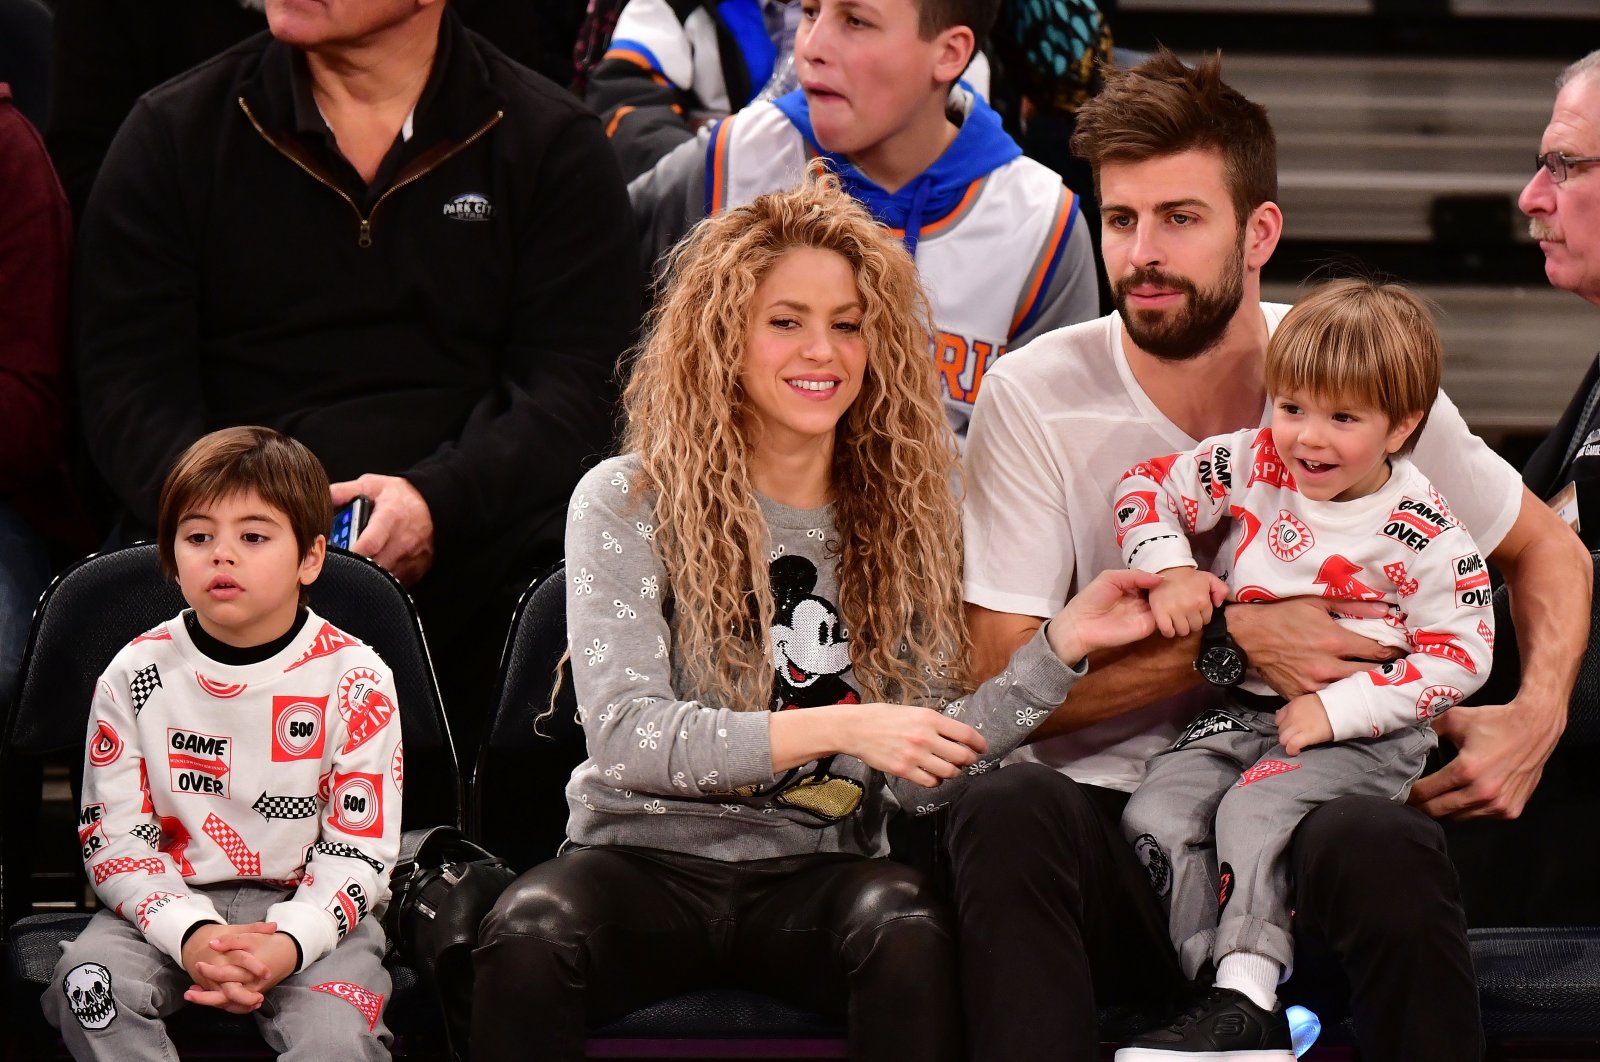 Gerard Pique (R) and ex-partner Shakira (2nd L) with their children Milan Pique Mebarak (L) and Sasha Pique Mebarak attend the New York Knicks vs Philadelphia 76ers game at Madison Square Garden, New York, Dec. 25, 2017.  (Getty Images Photo)